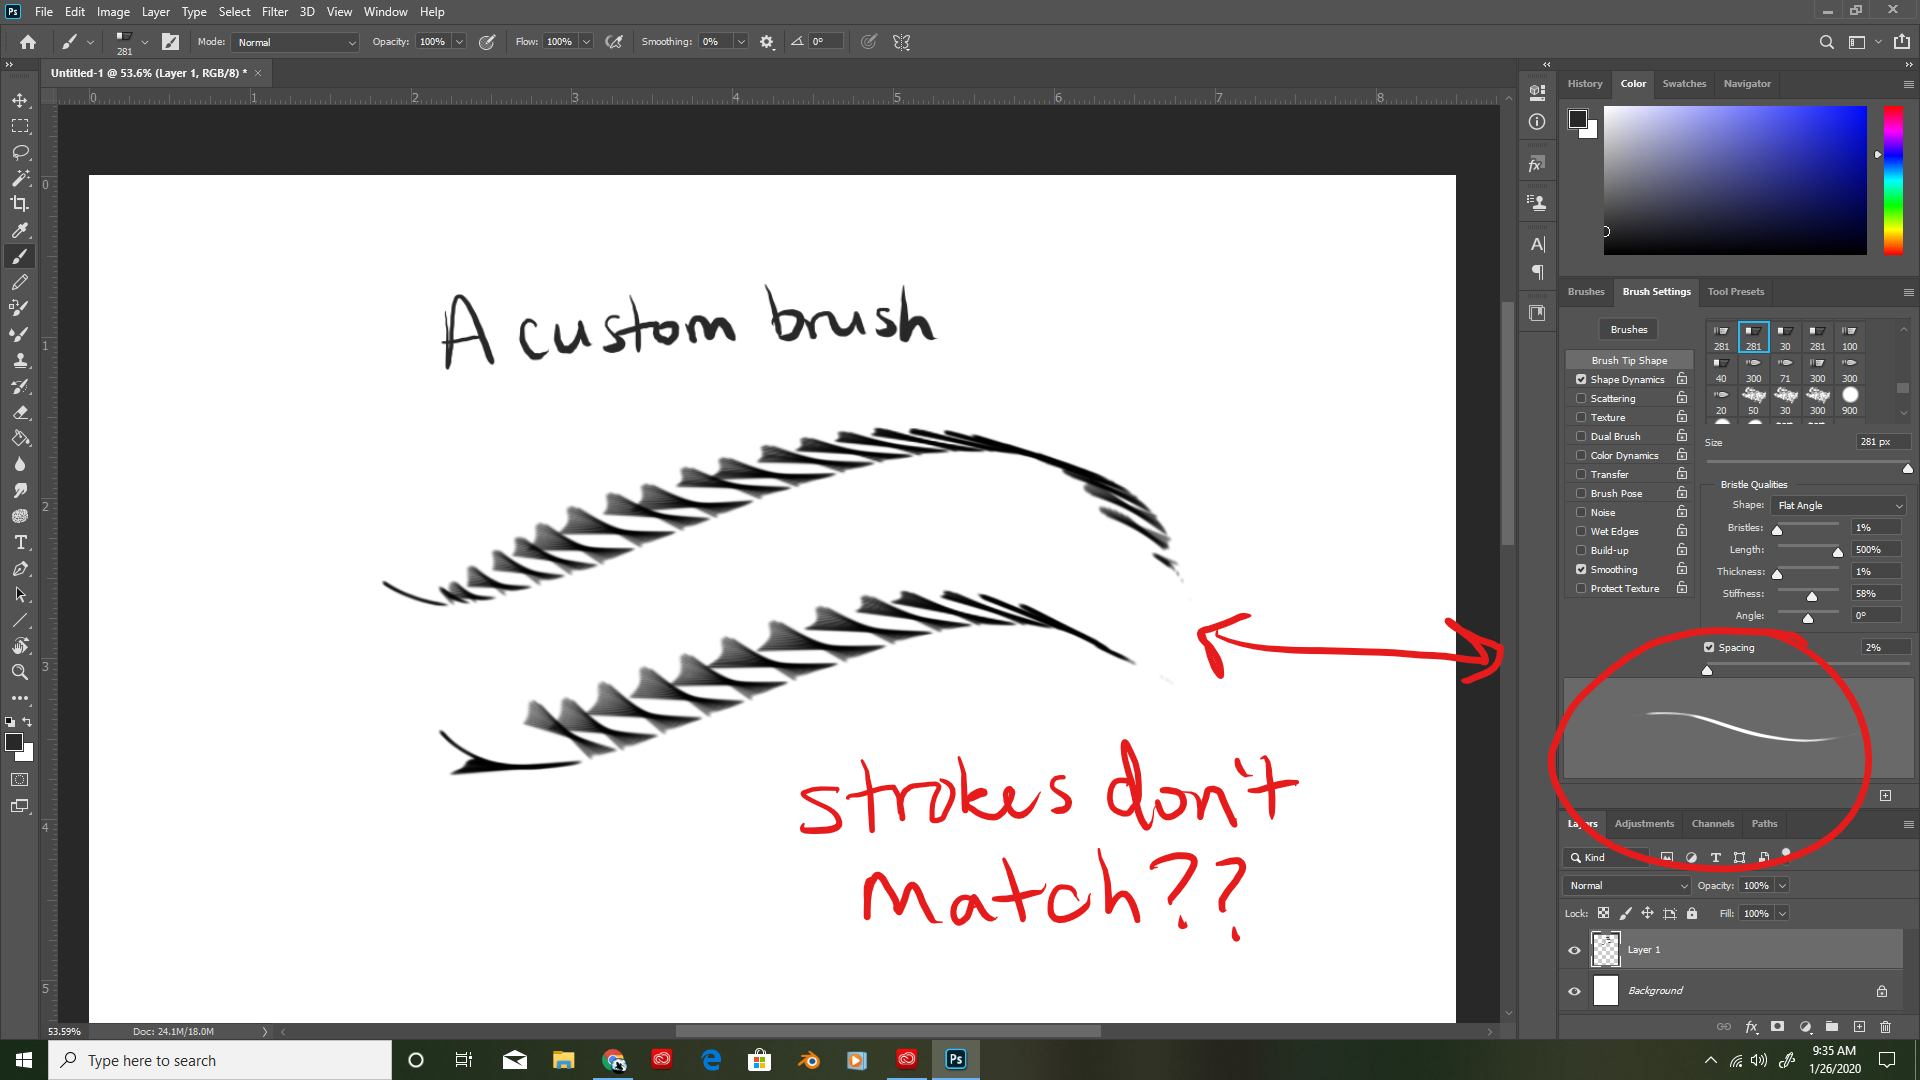 Problem With Brush Strokes Appears To Be Stamping Adobe Community